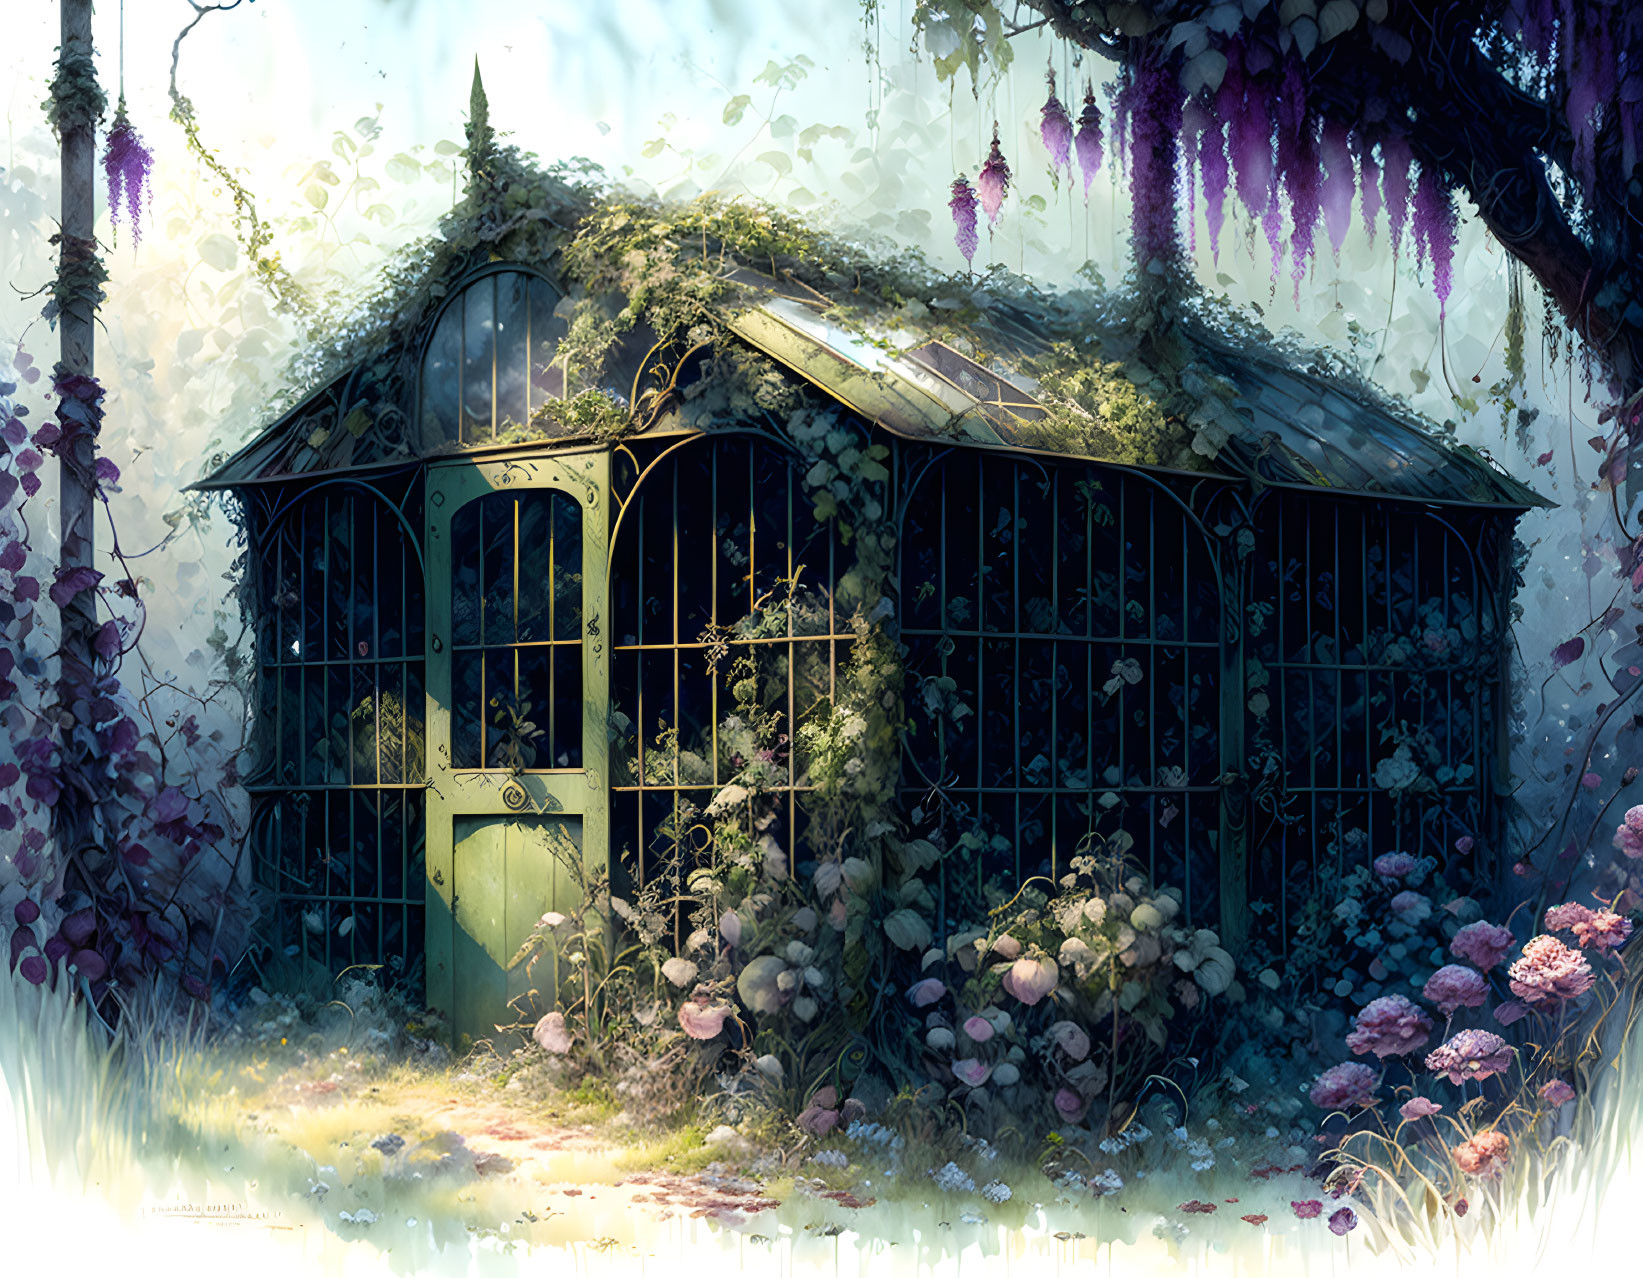 Overgrown greenhouse in magical forest with lush vegetation and purple flowers